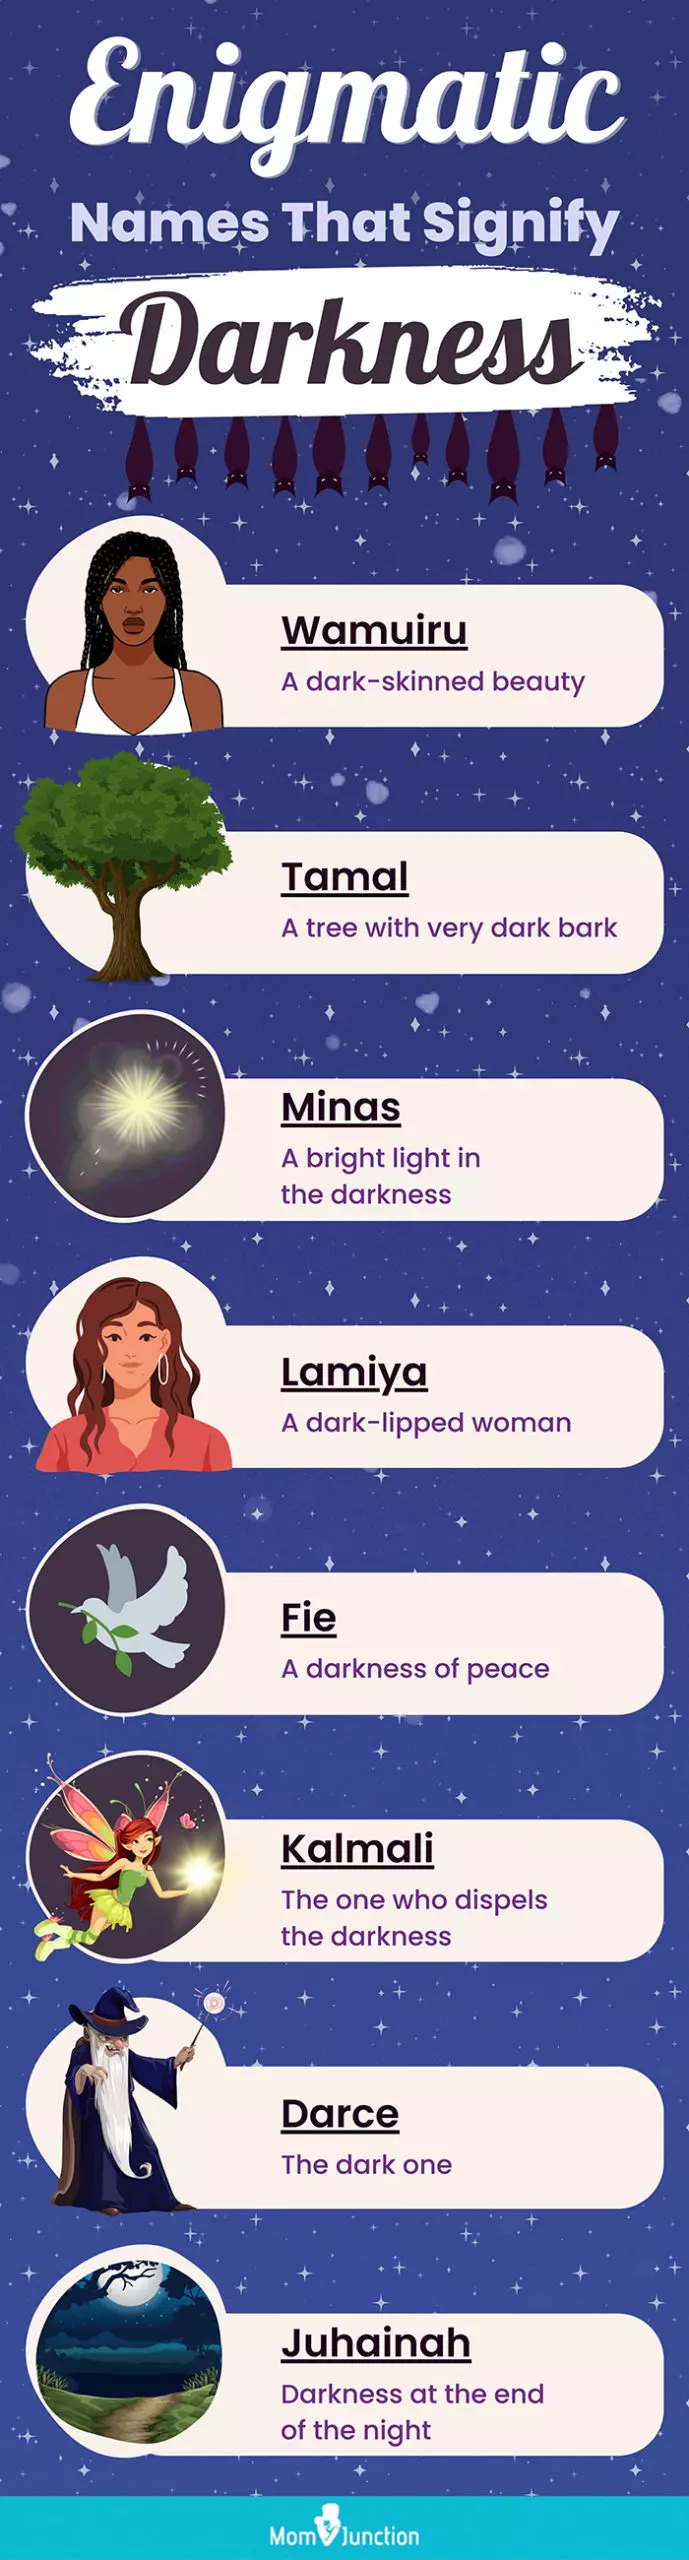 enigmatic names that signify darkness (infographic)